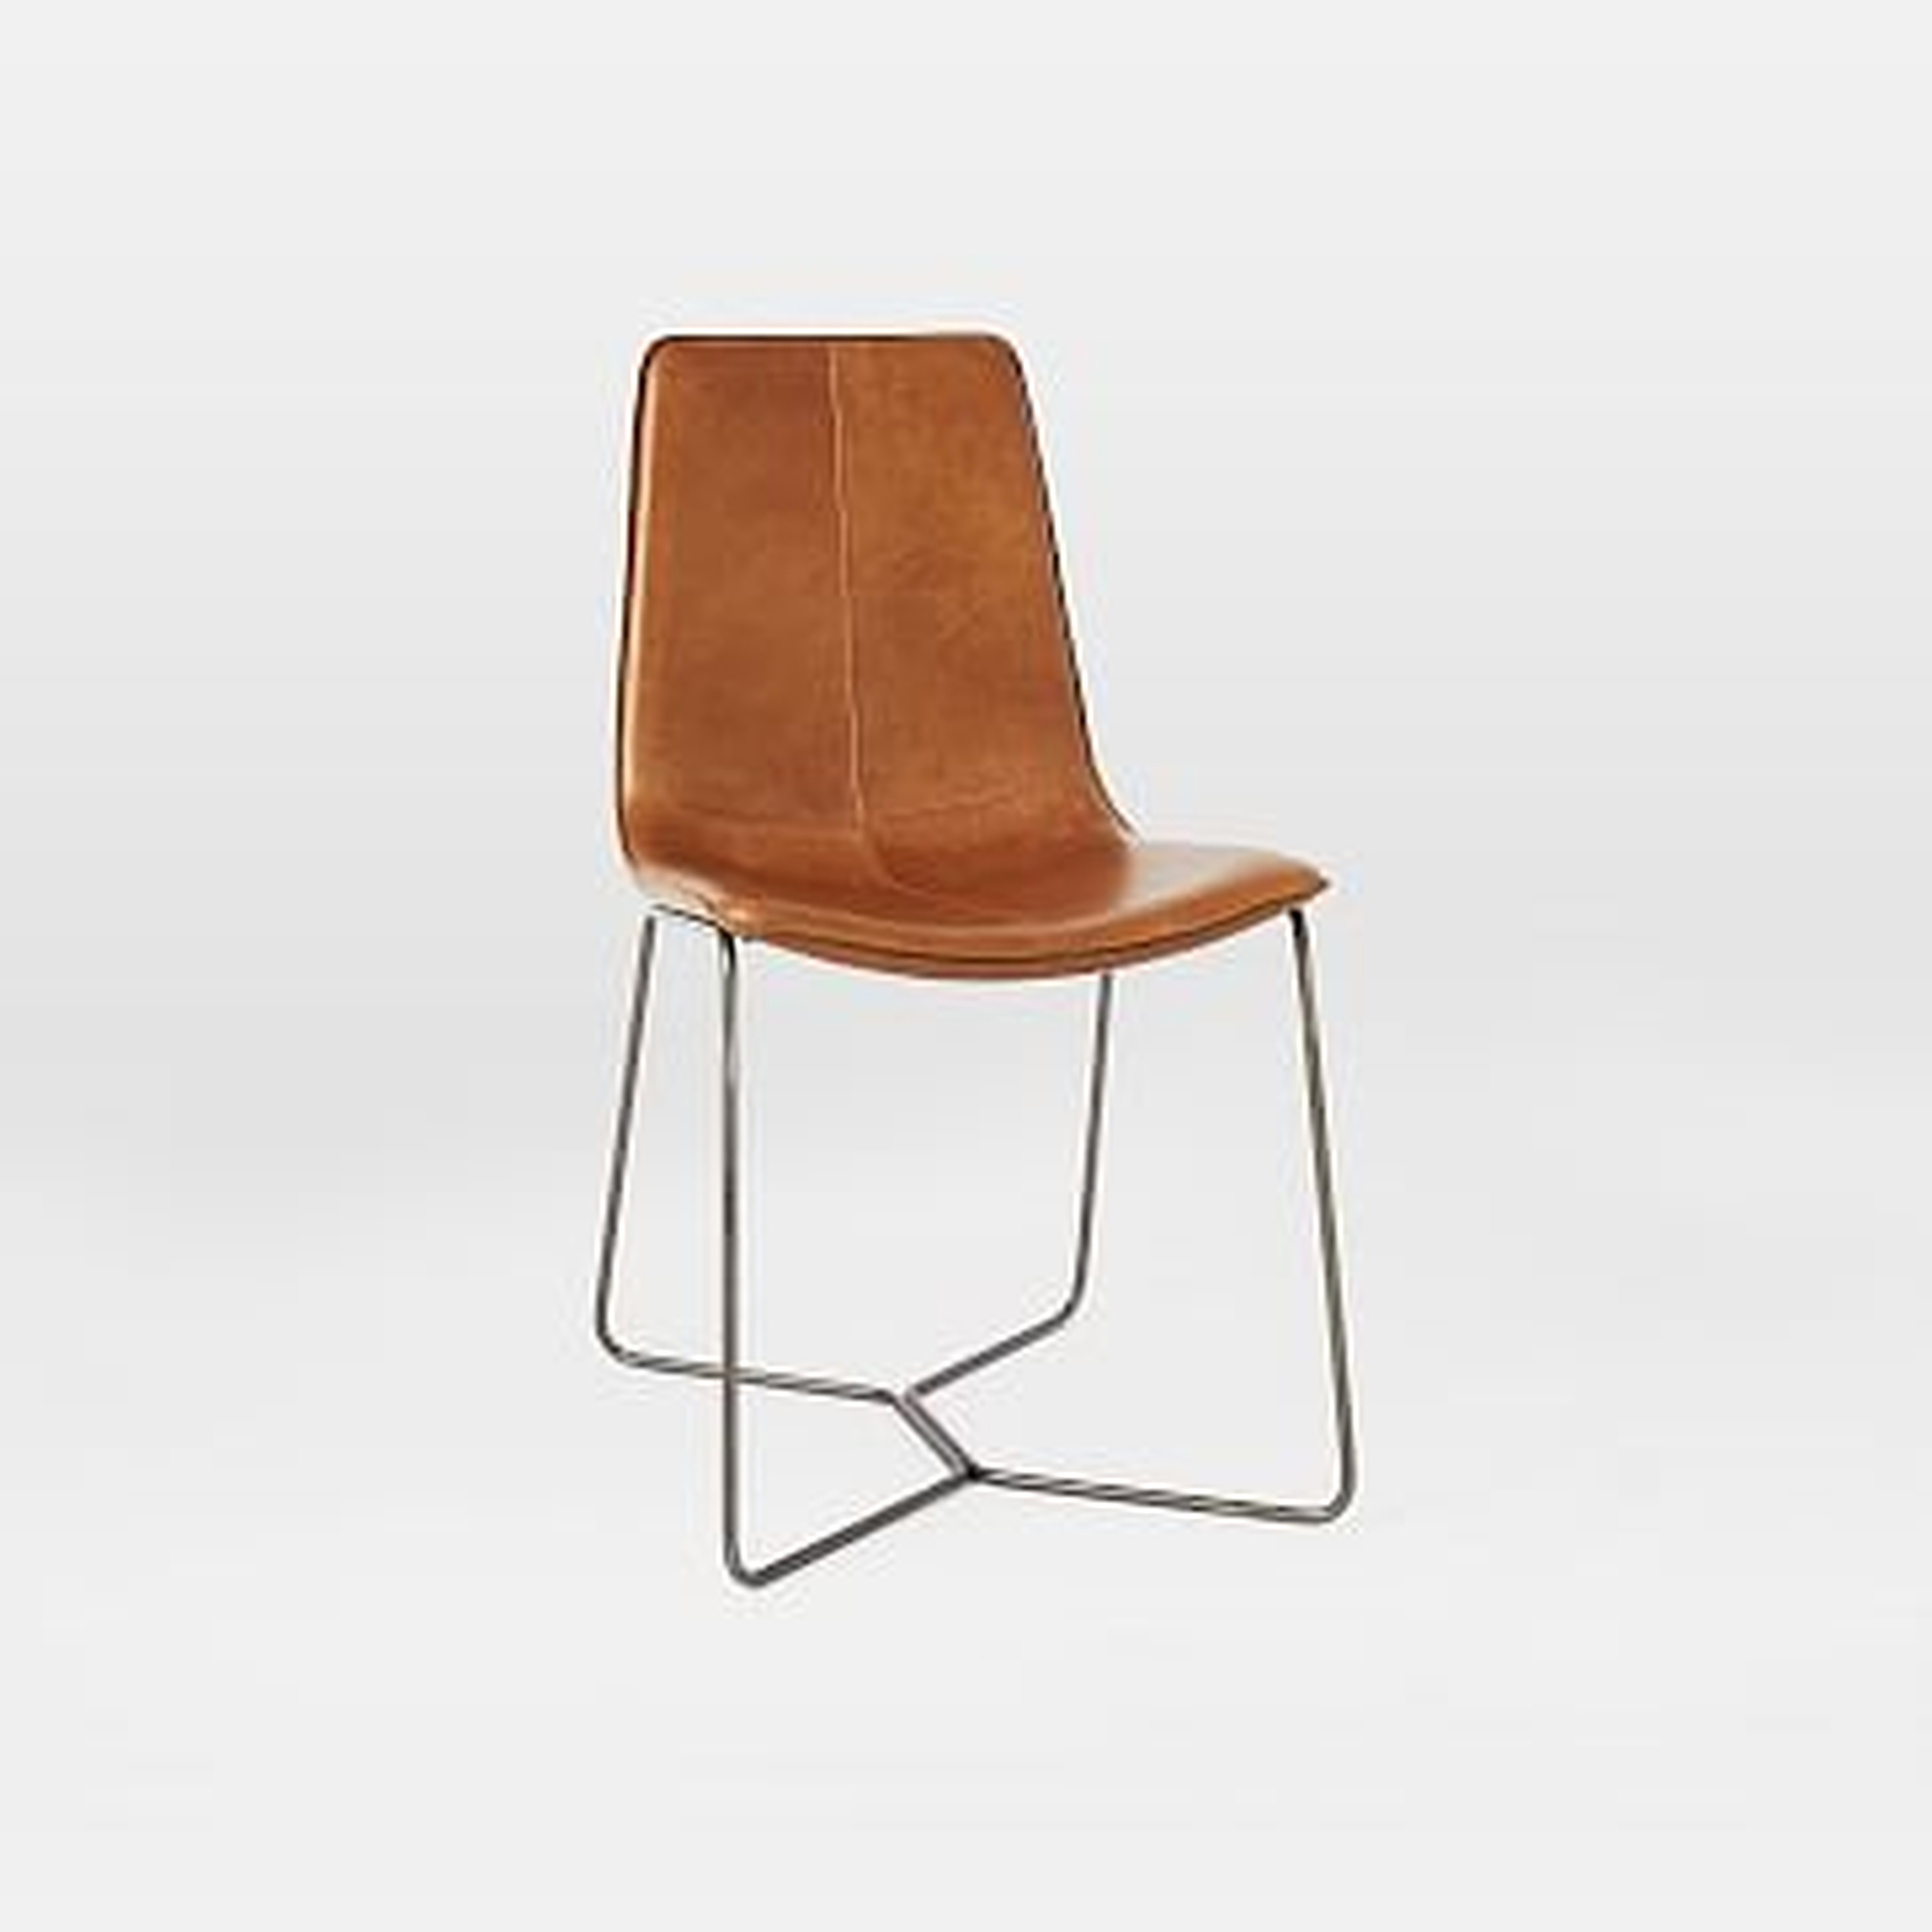 Leather Slope Dining Chair Saddle ( set of 2) - West Elm